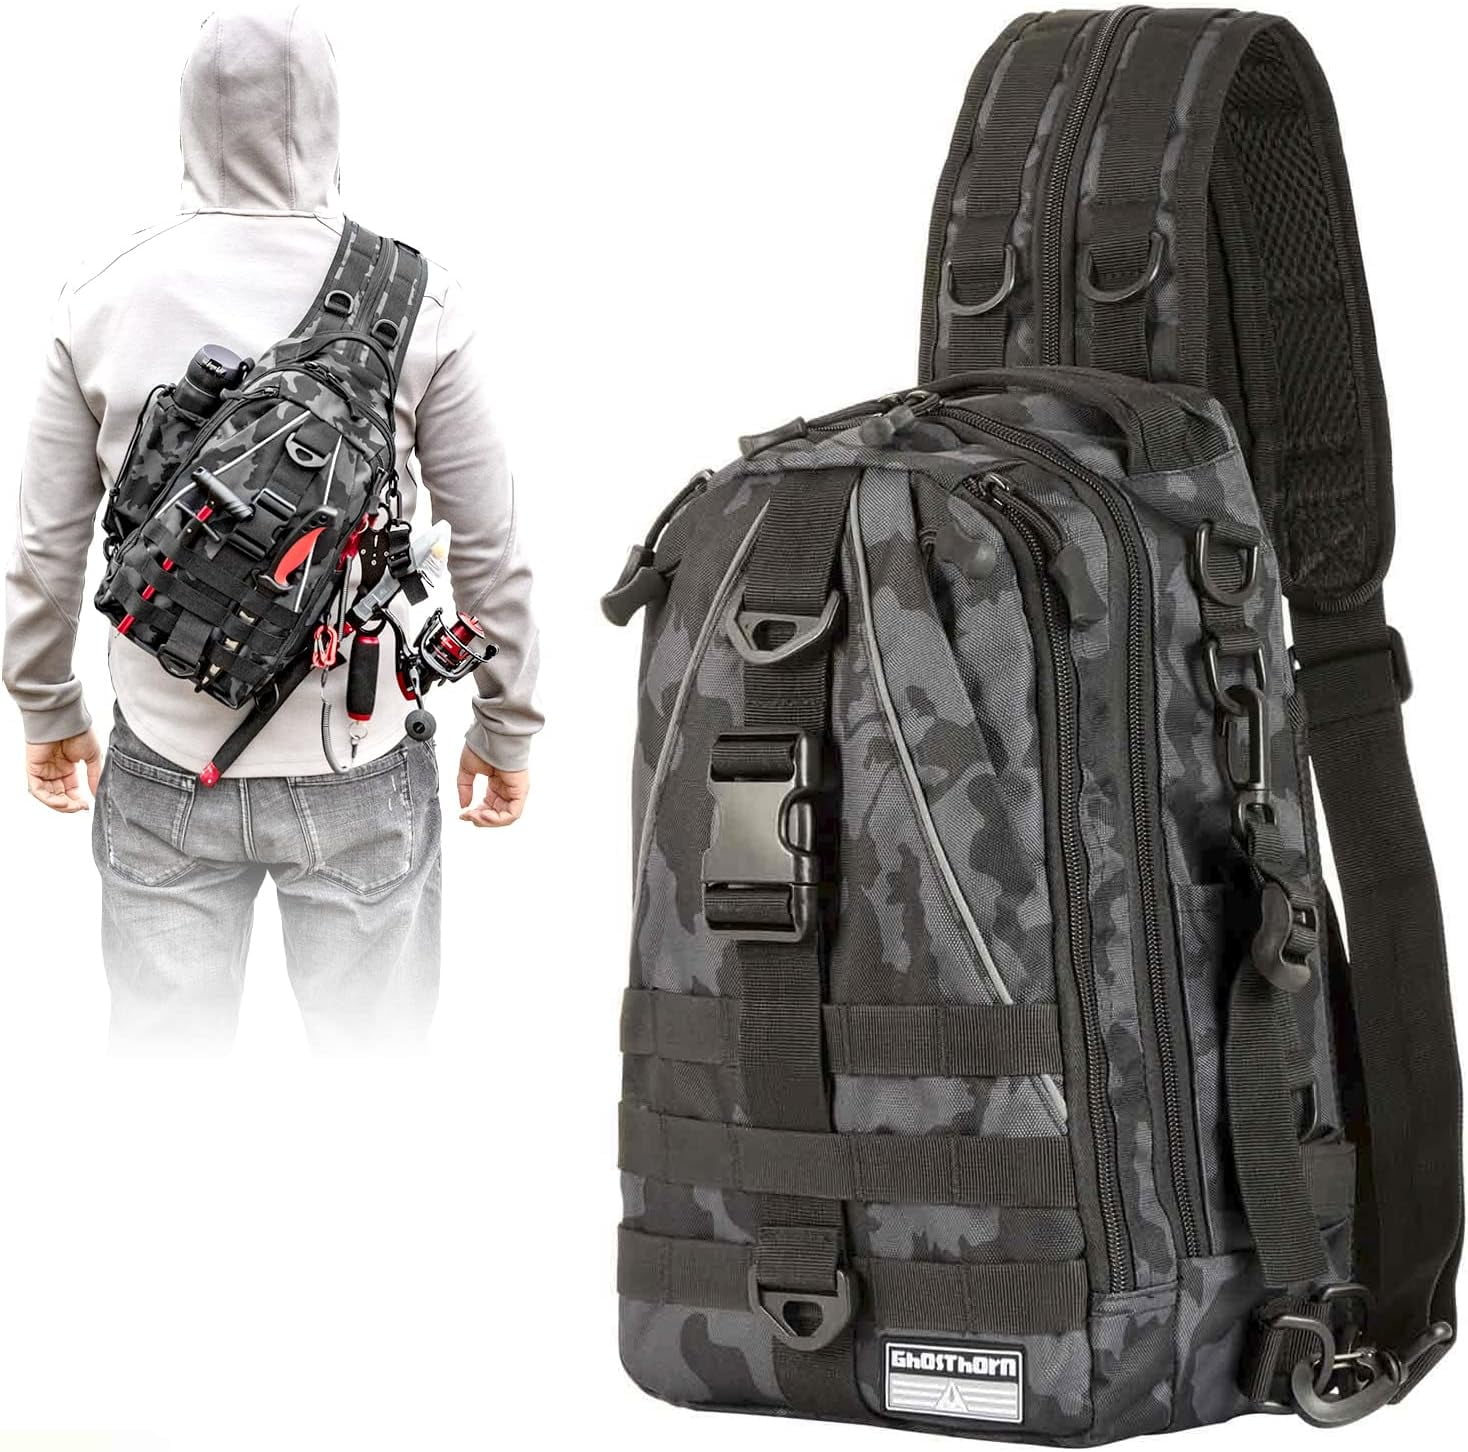  Fly Fishing Backpack